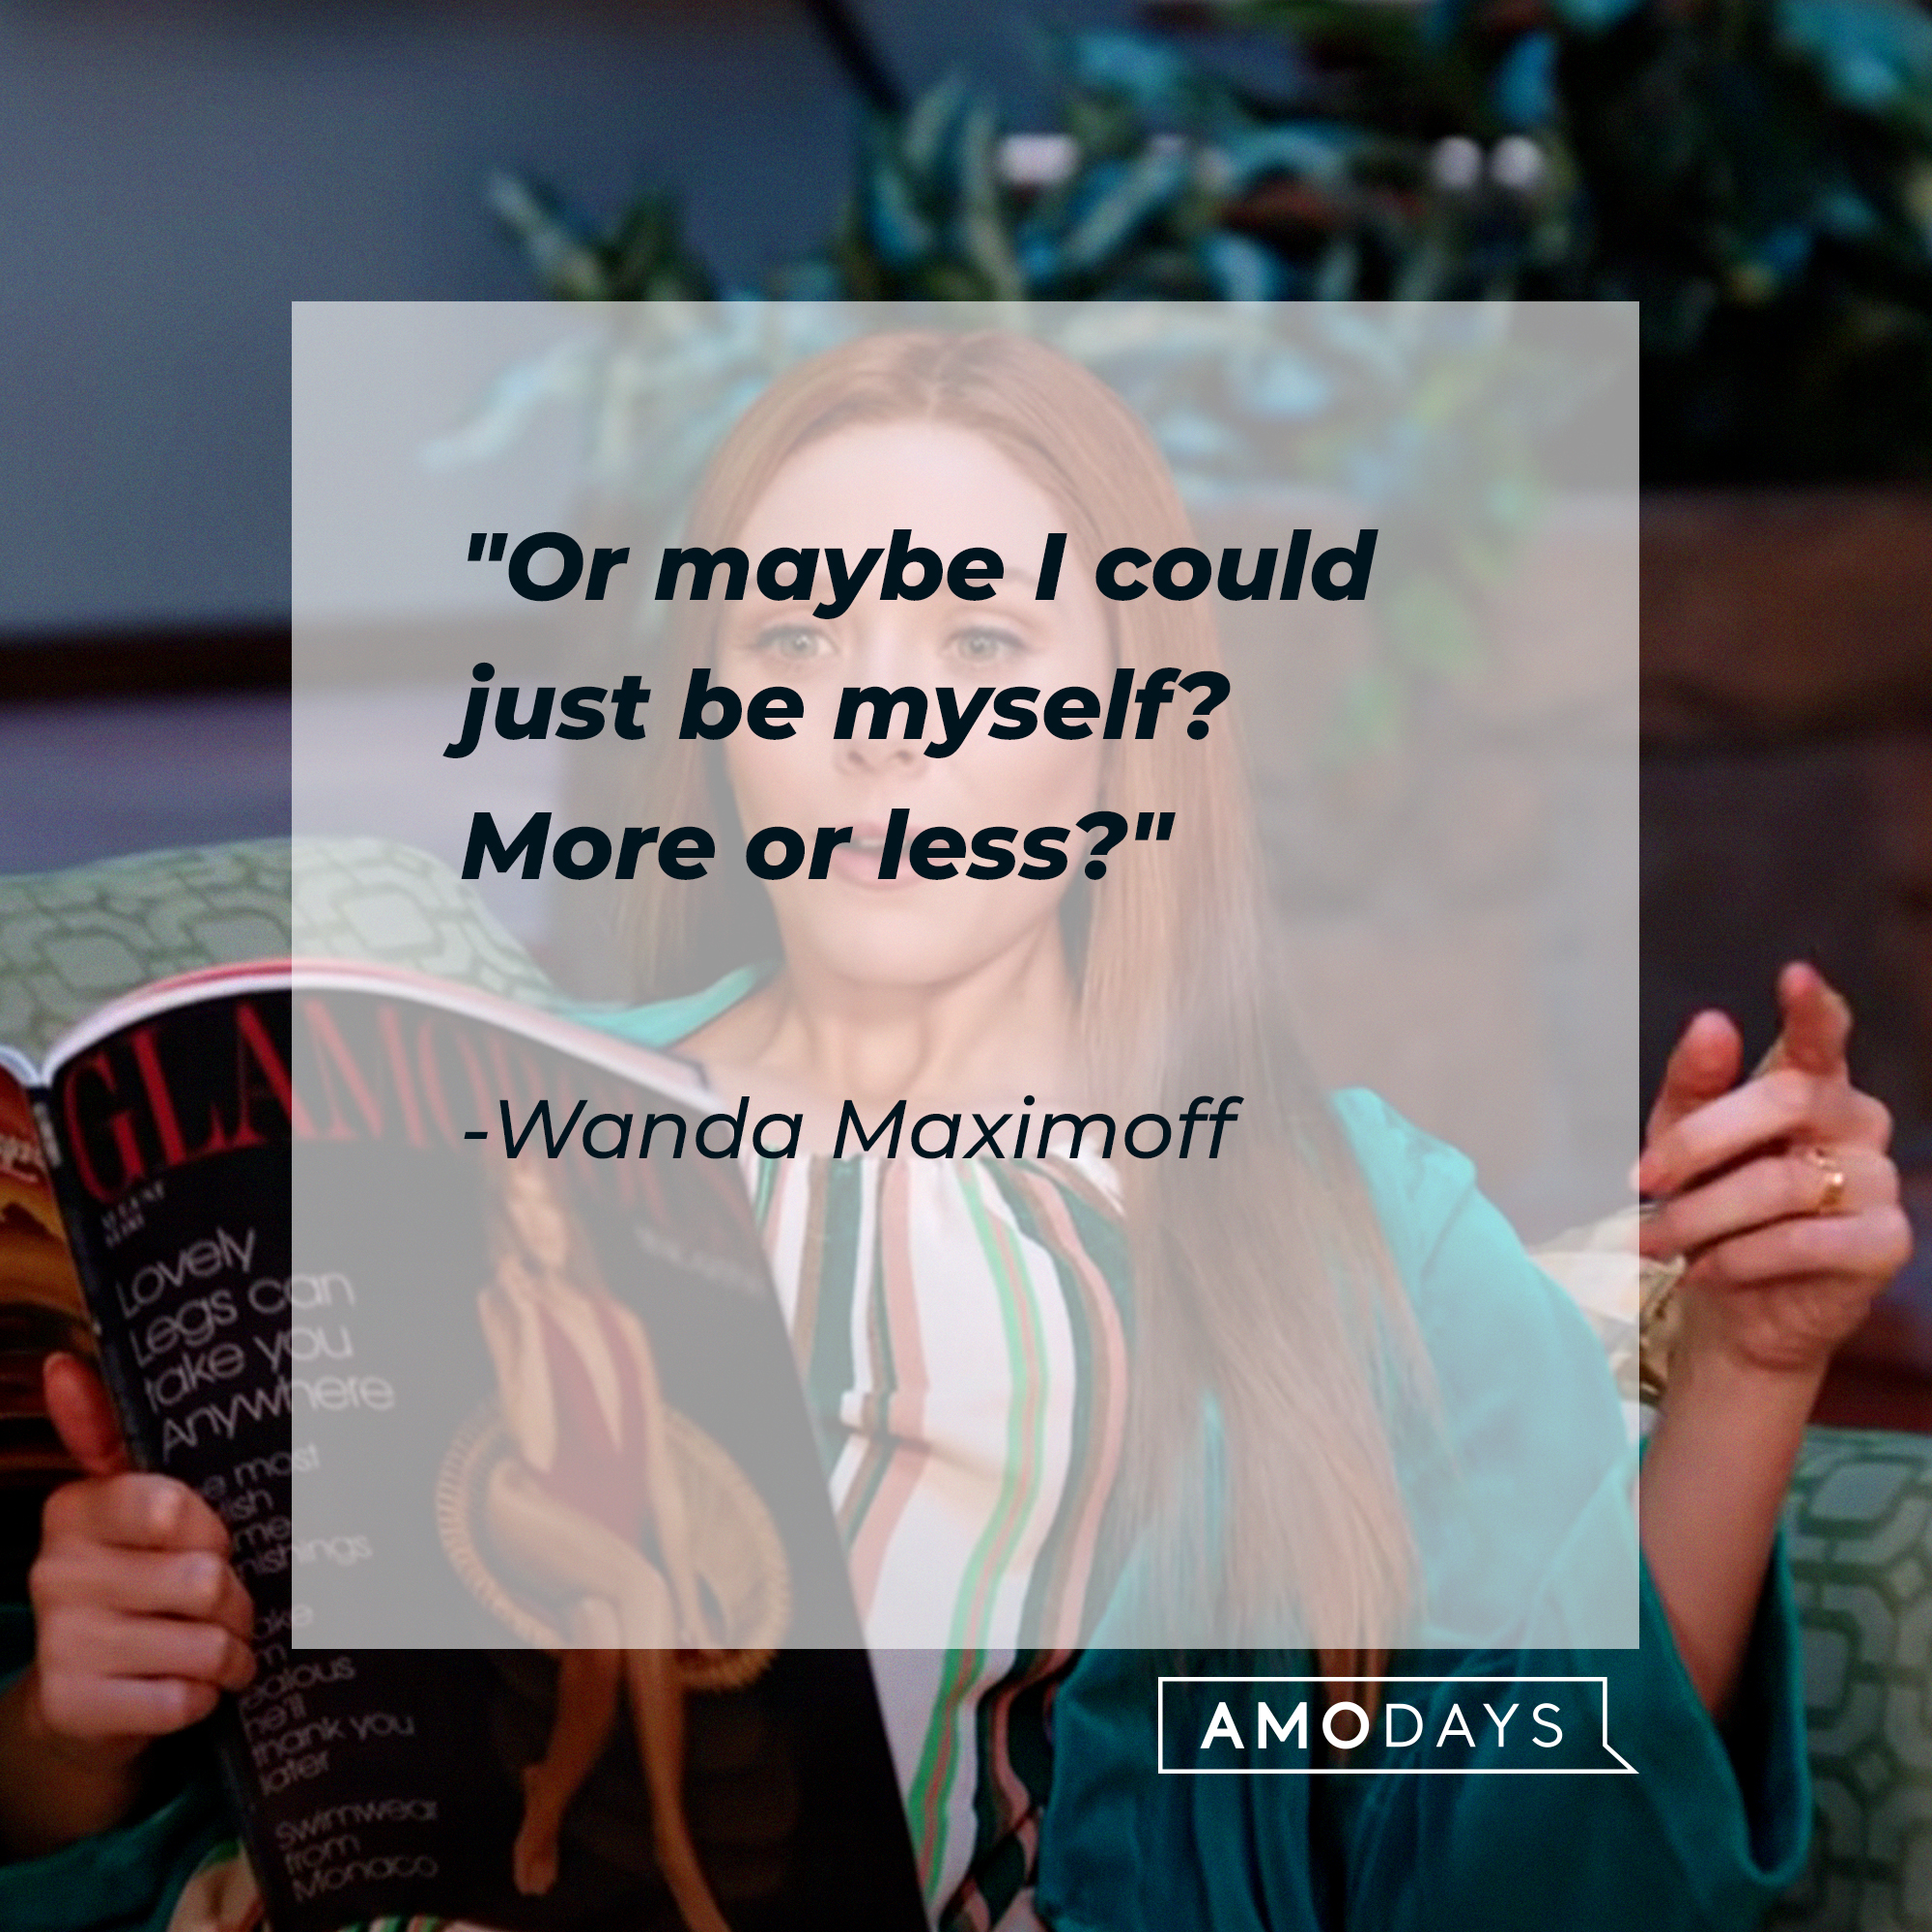 Wanda Maximoff's quote: "Or maybe I could just be myself? More or less?" | Source: Facebook/wandavisionofficial